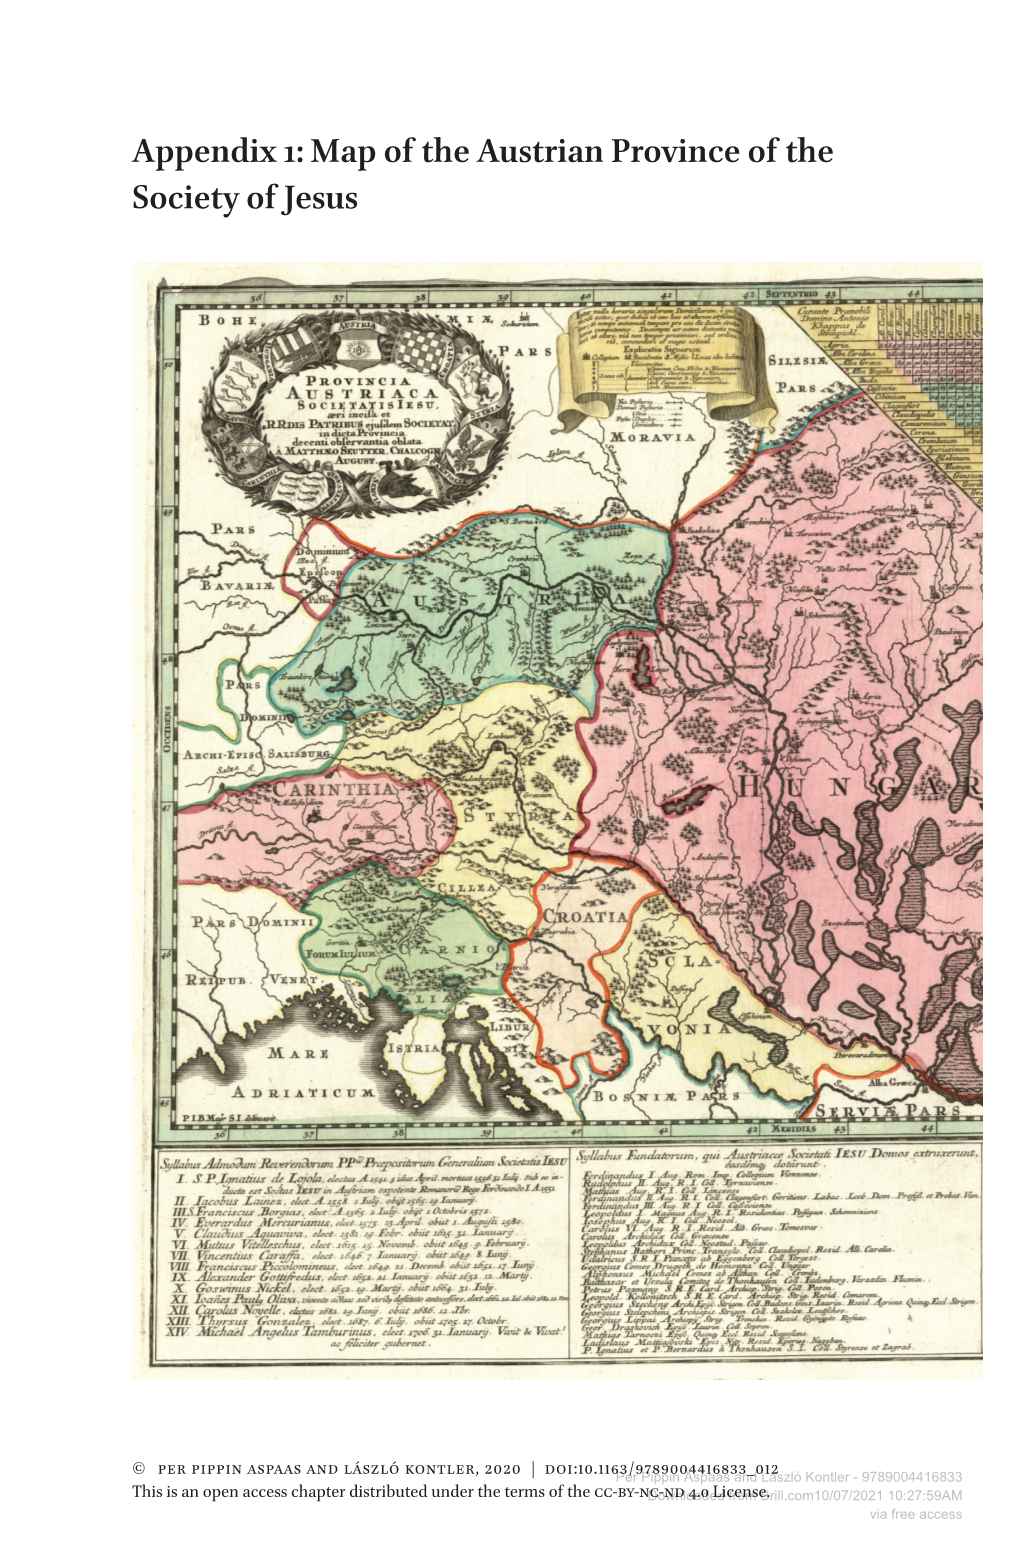 Appendix 1: Map of the Austrian Province of the Society of Jesus